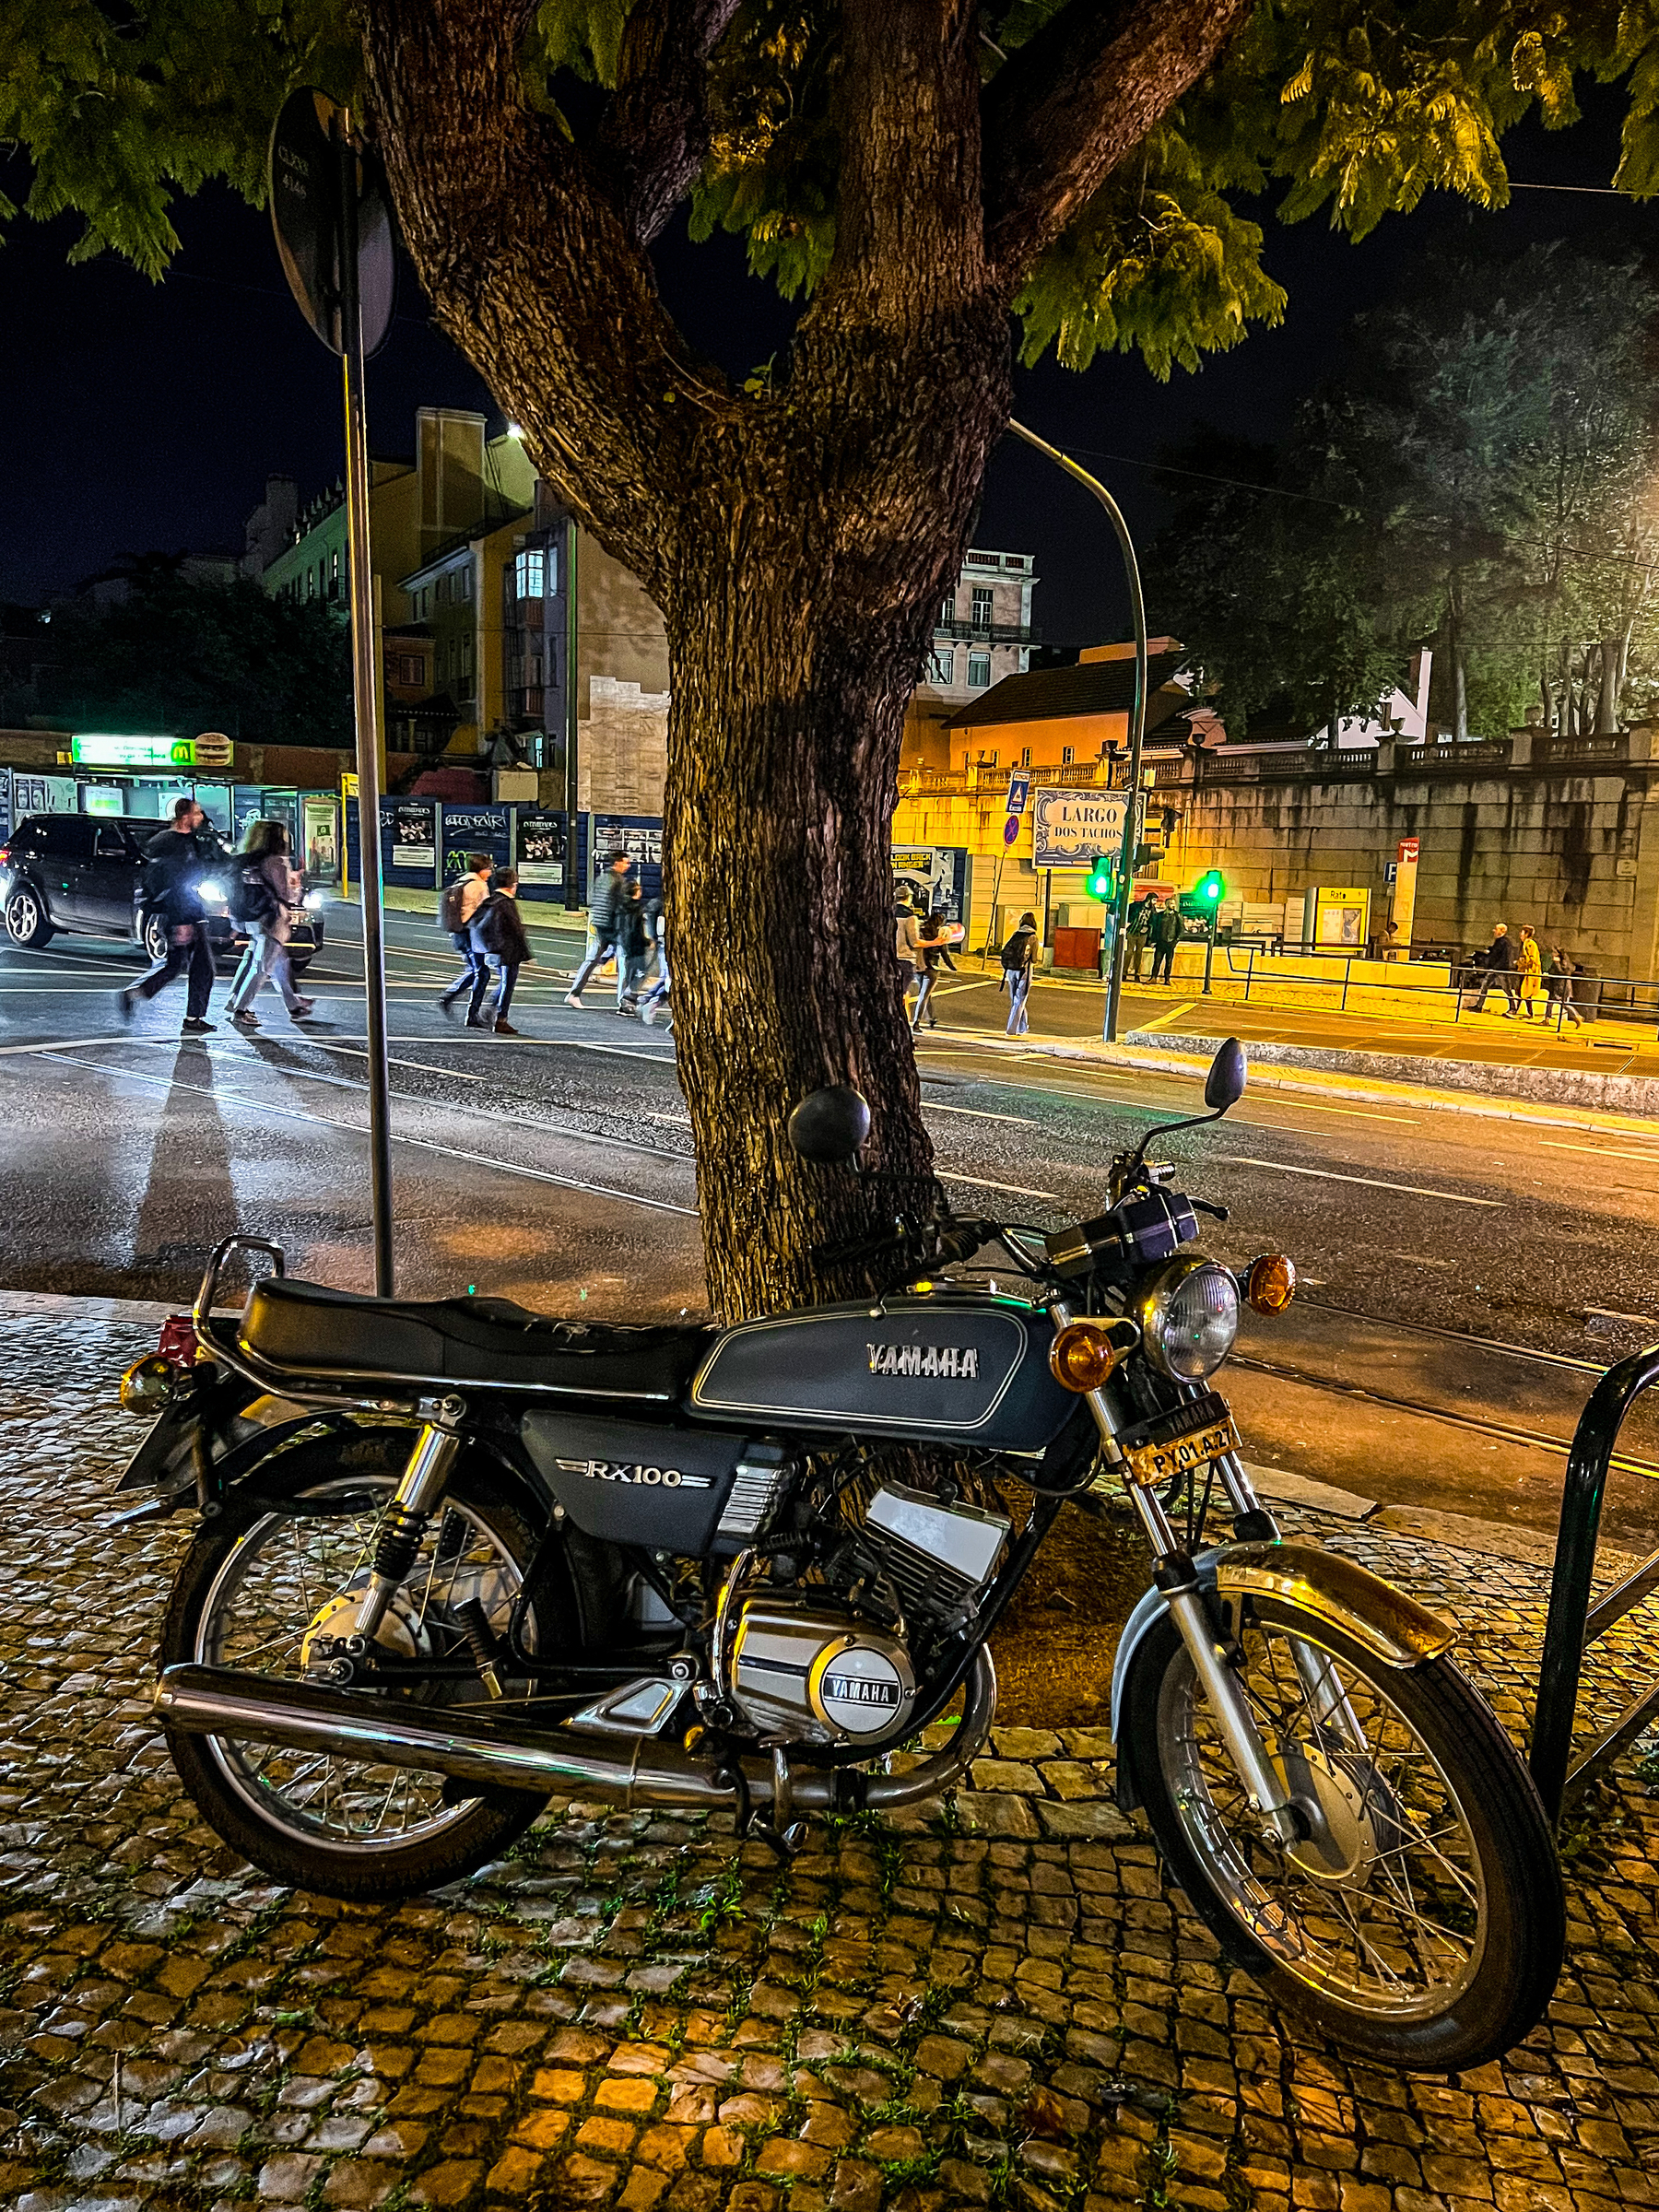 night shot, a motorcycle parked under a tree, city life in the back